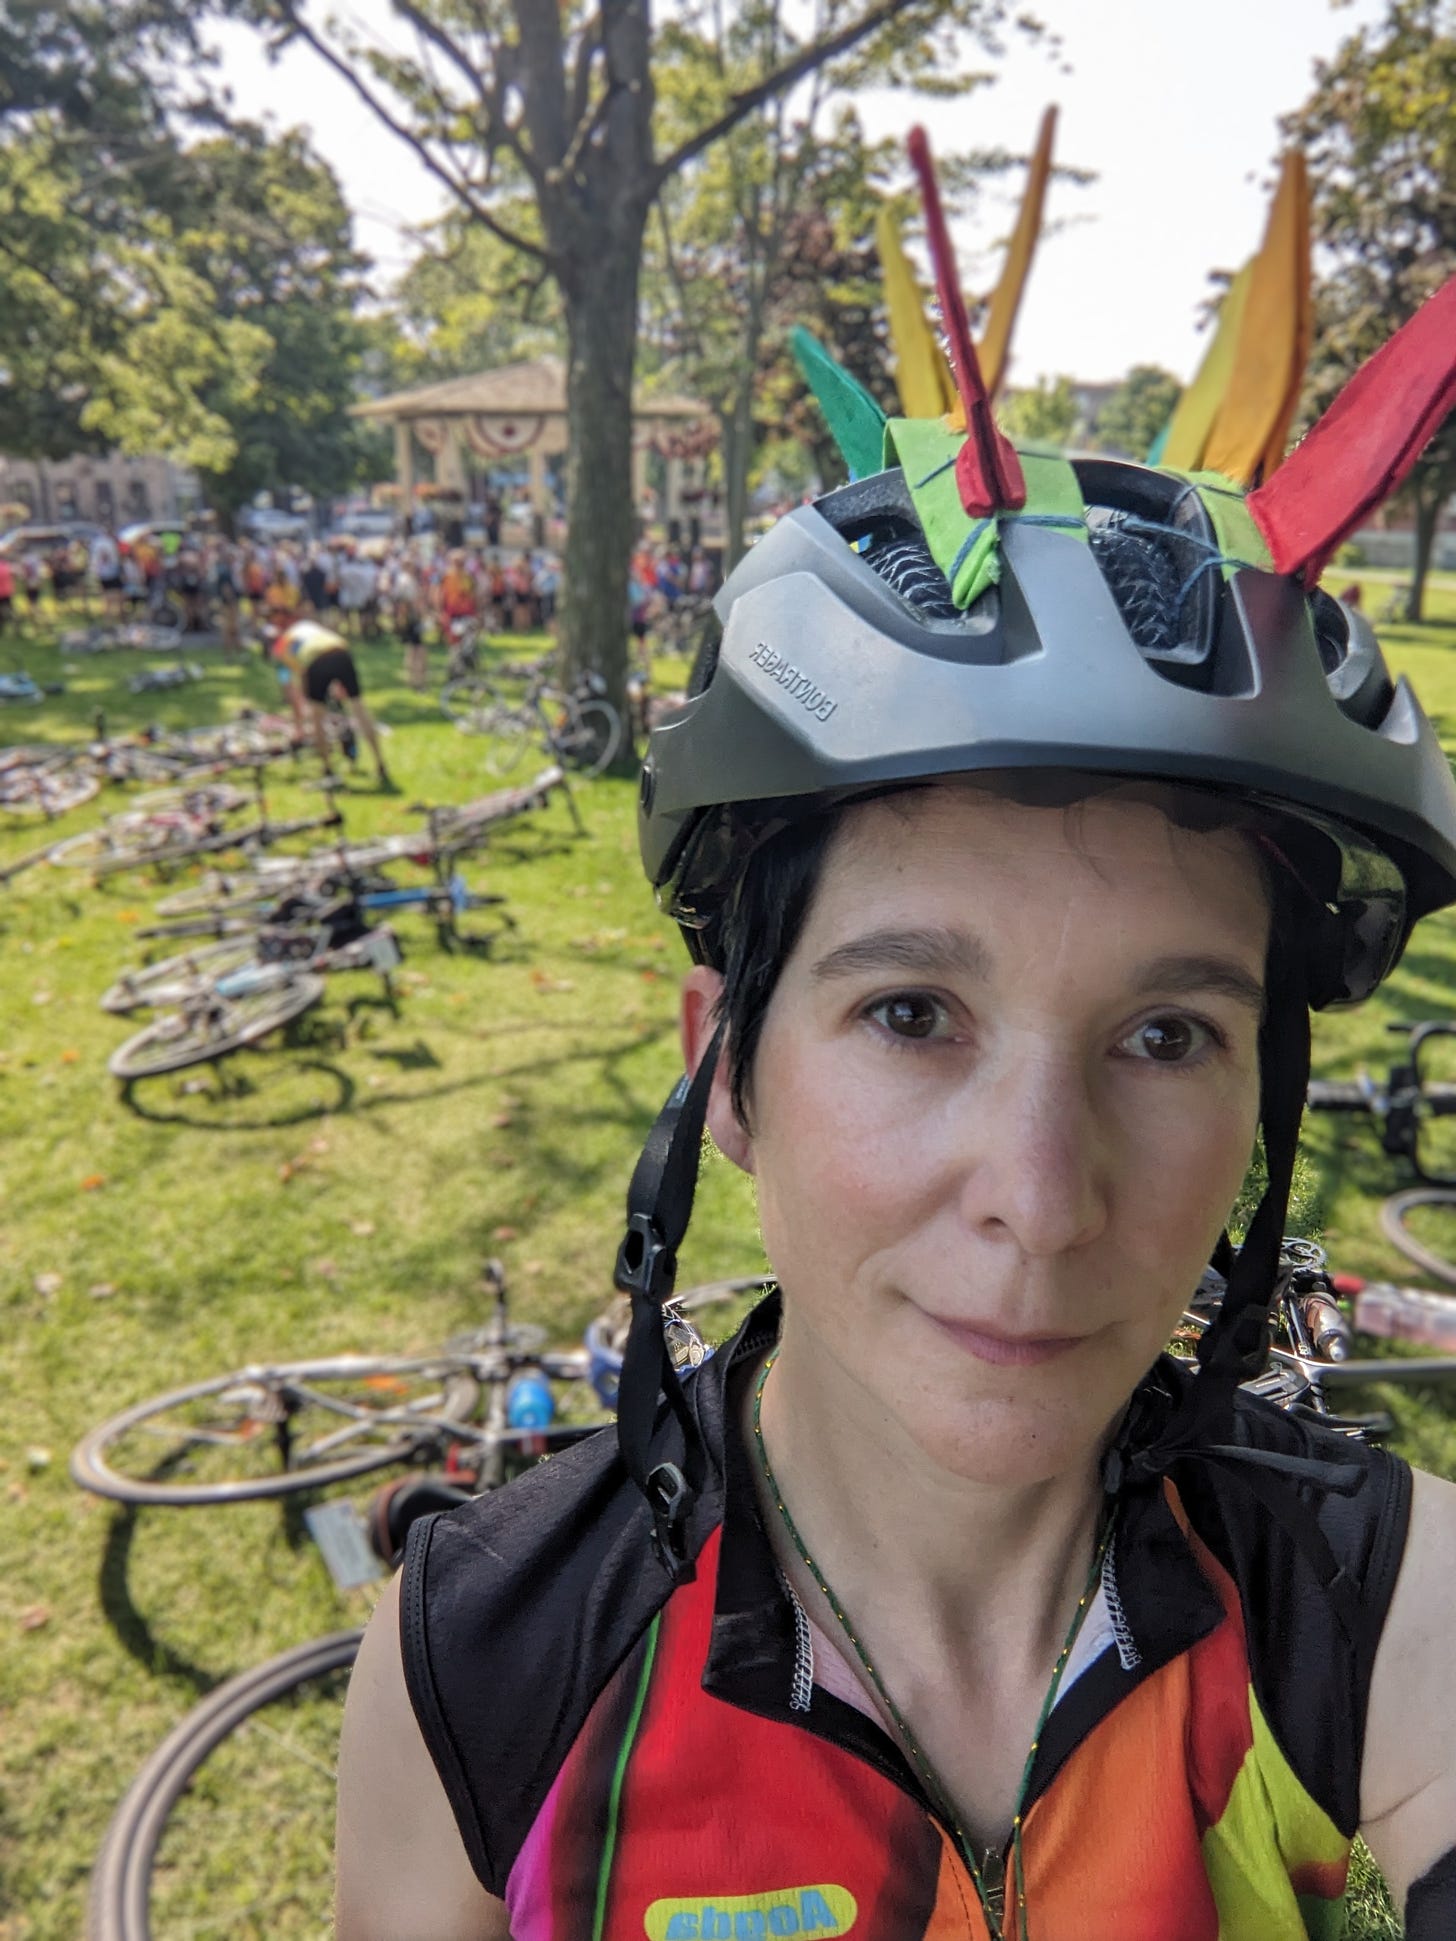 A light-skinned person in a black bike helmet stands in the foreground. In the background, a mass of bikes and a crowd.